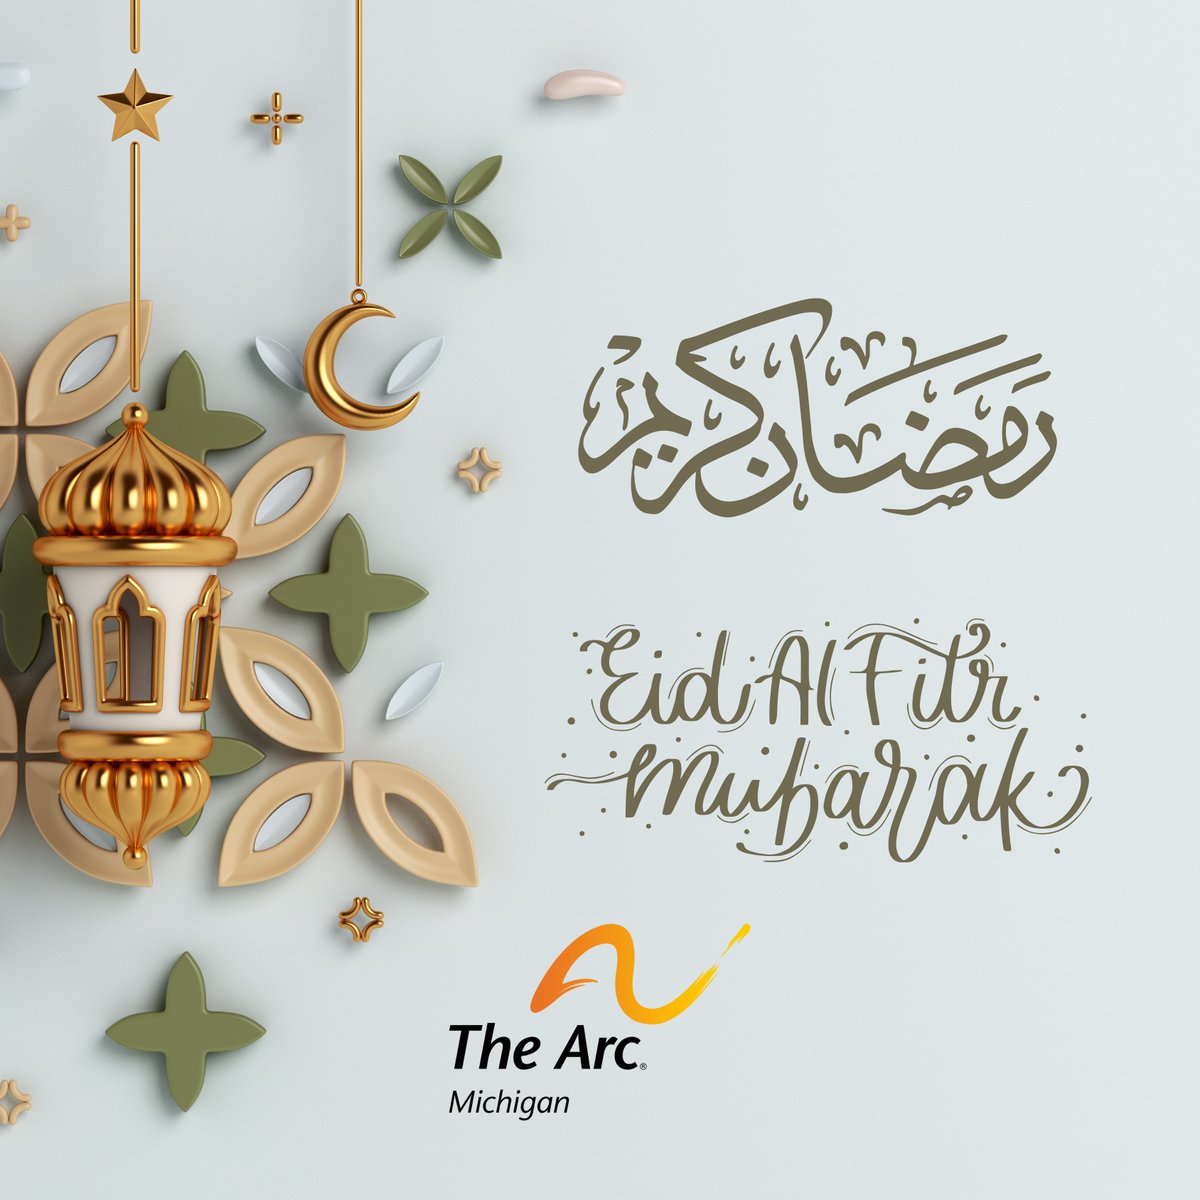 Wishing our Muslim friends a joyous Eid Al Fitr! Ramadan is a time of unity & reflection & it's crucial to ensure everyone feels welcomed & valued. May this Eid bring peace, happiness, & prosperity. Eid Mubarak! #EidAlFitr #InclusionMatters #UnityInDiversity #TheArcMichigan